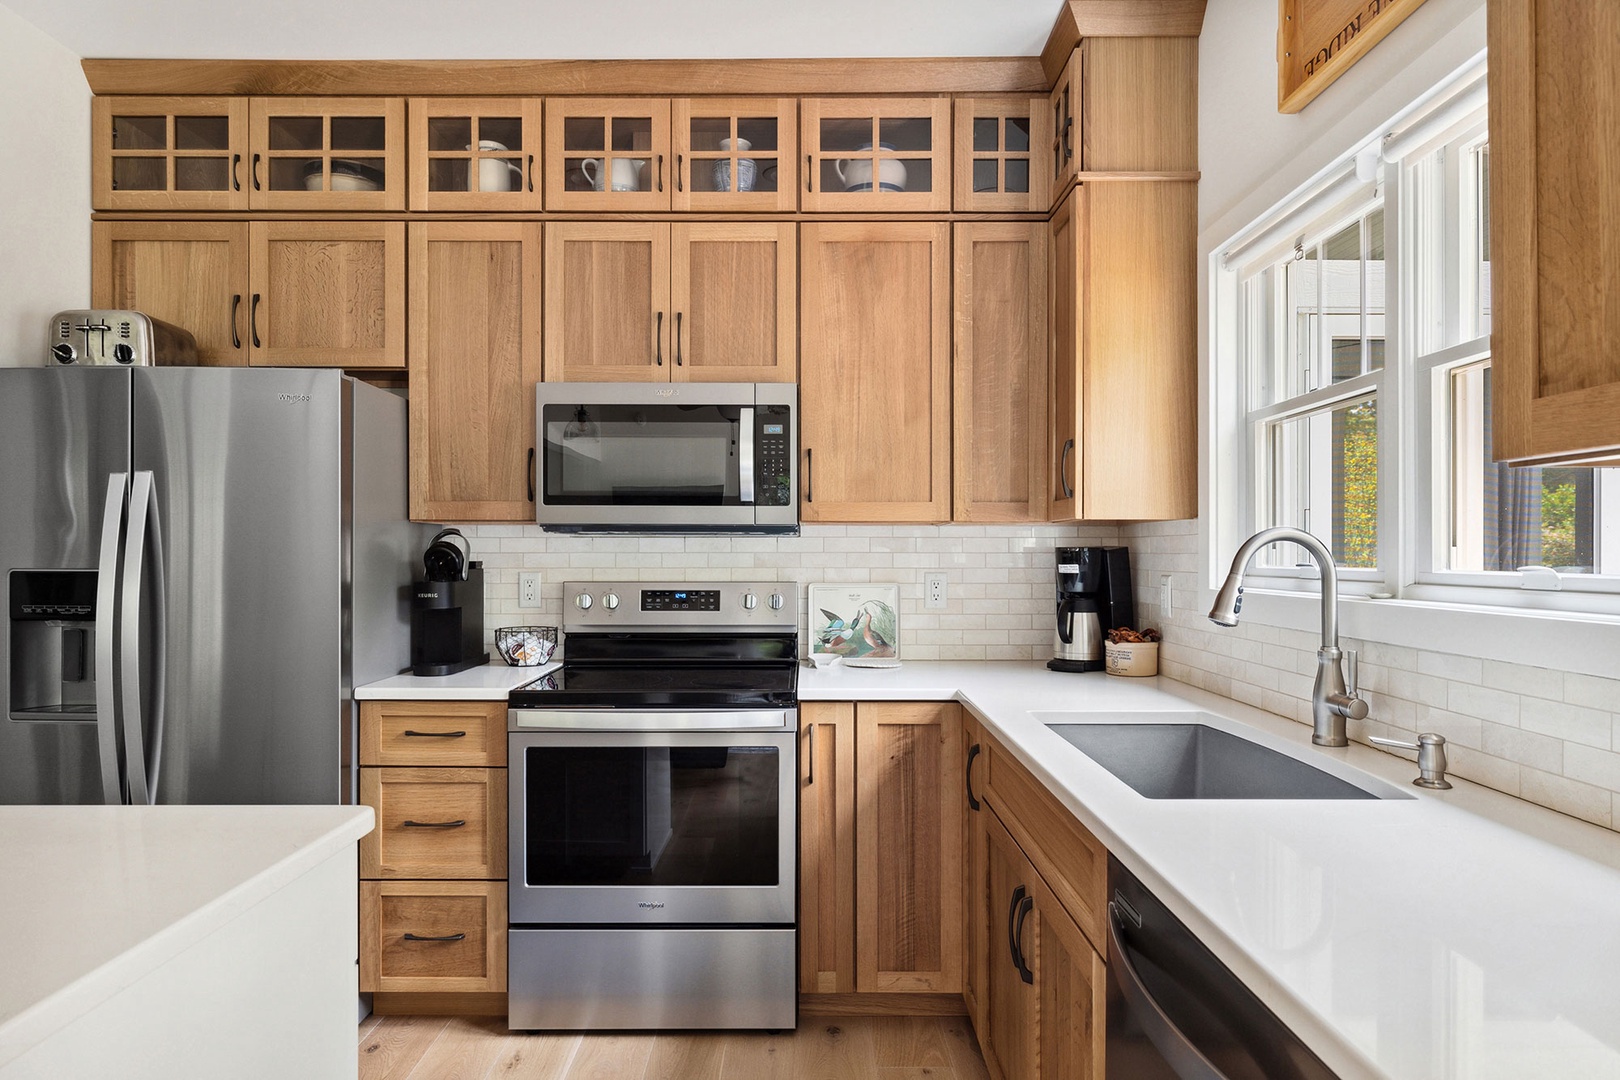 Cook in style with stainless steel appliances and spacious counters.